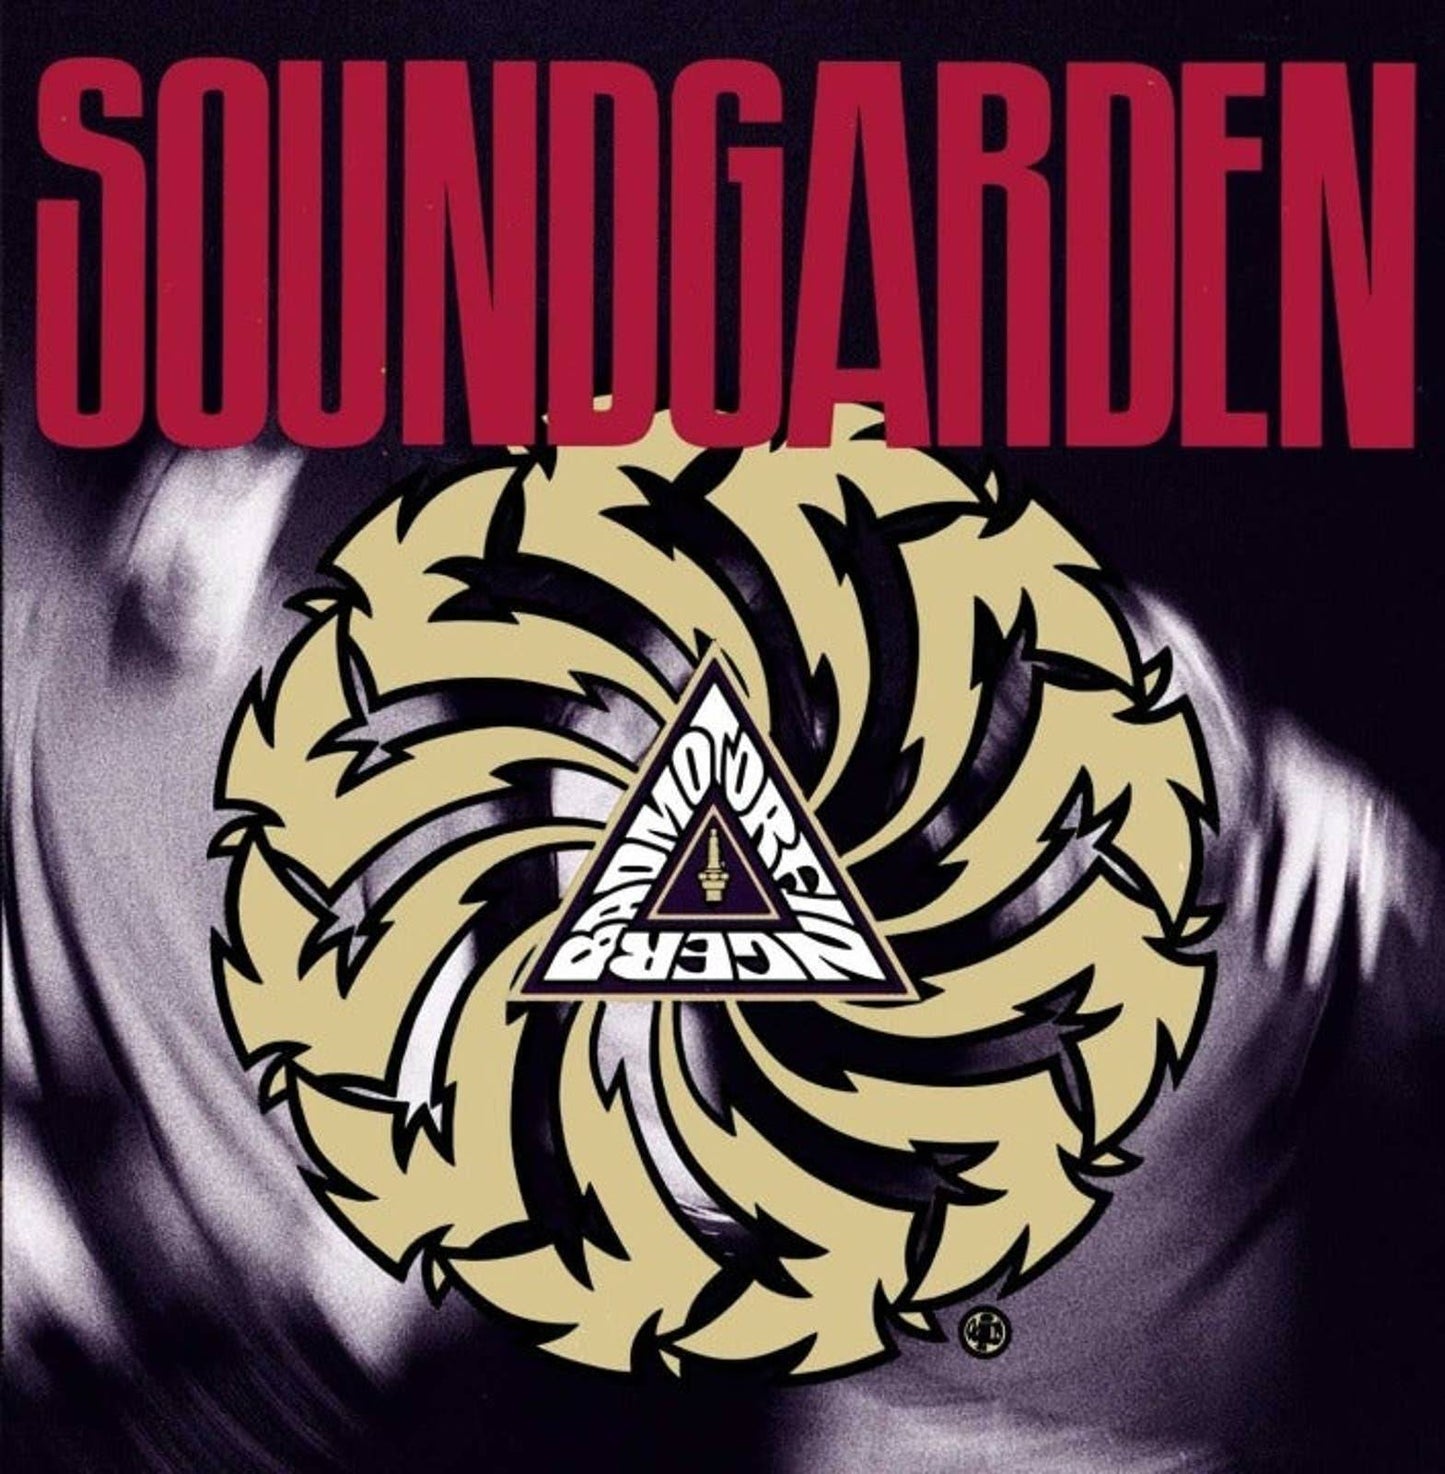 48" x 48" Soundgarden Tapestry Wall Hanging Décor